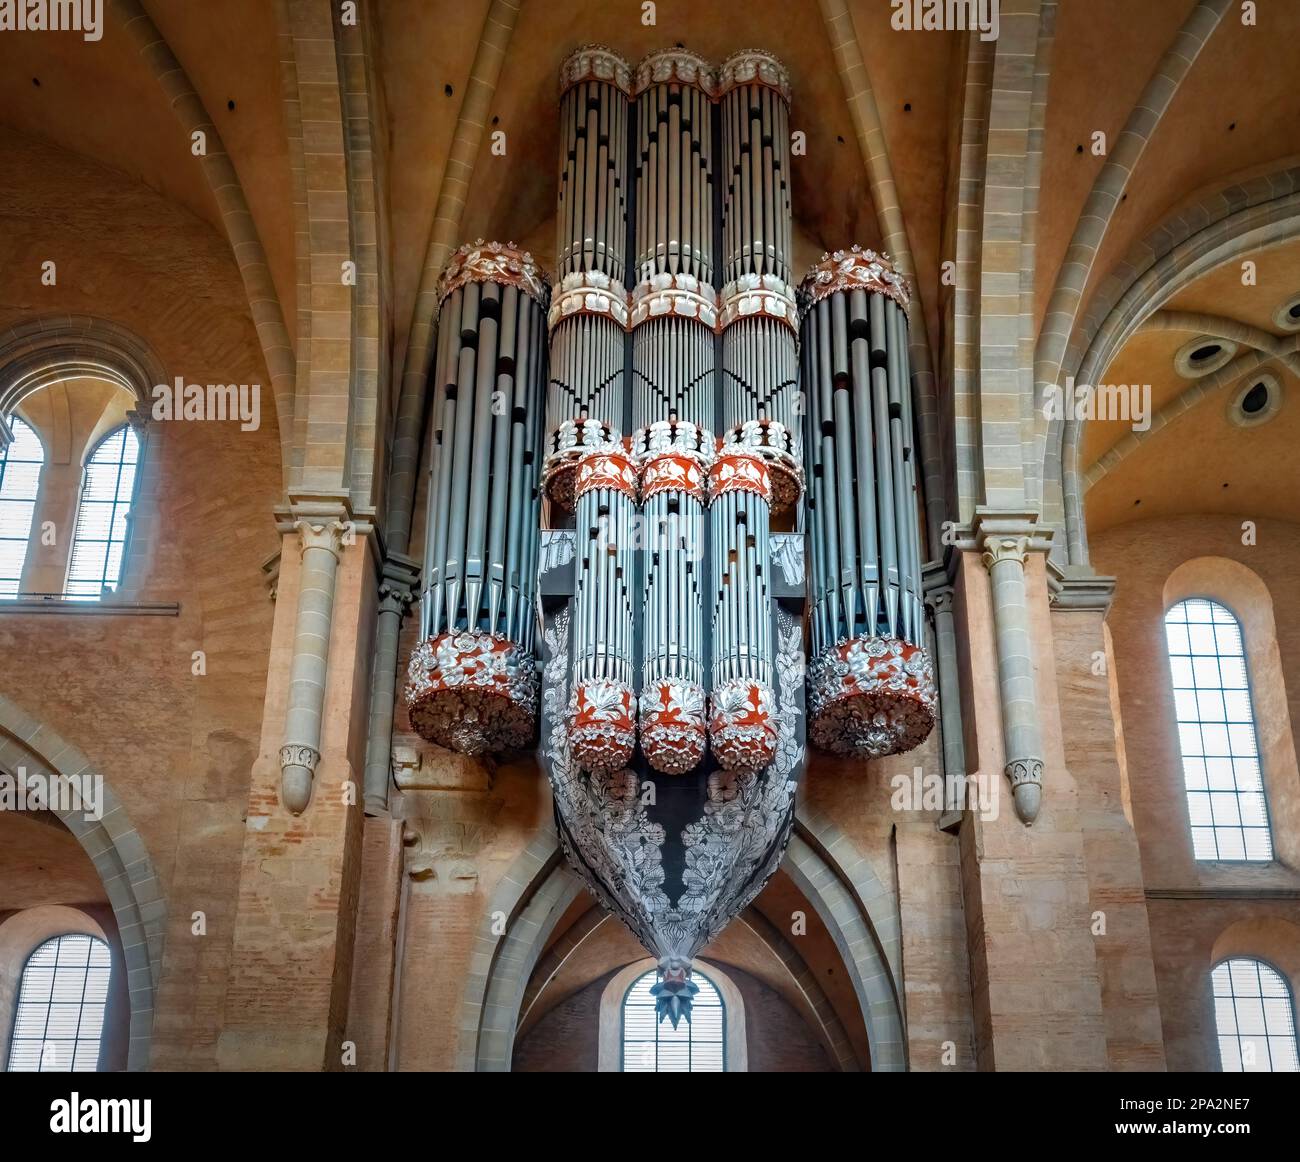 Pipe Organ at Trier Cathedral Interior - Trier, Germany Stock Photo